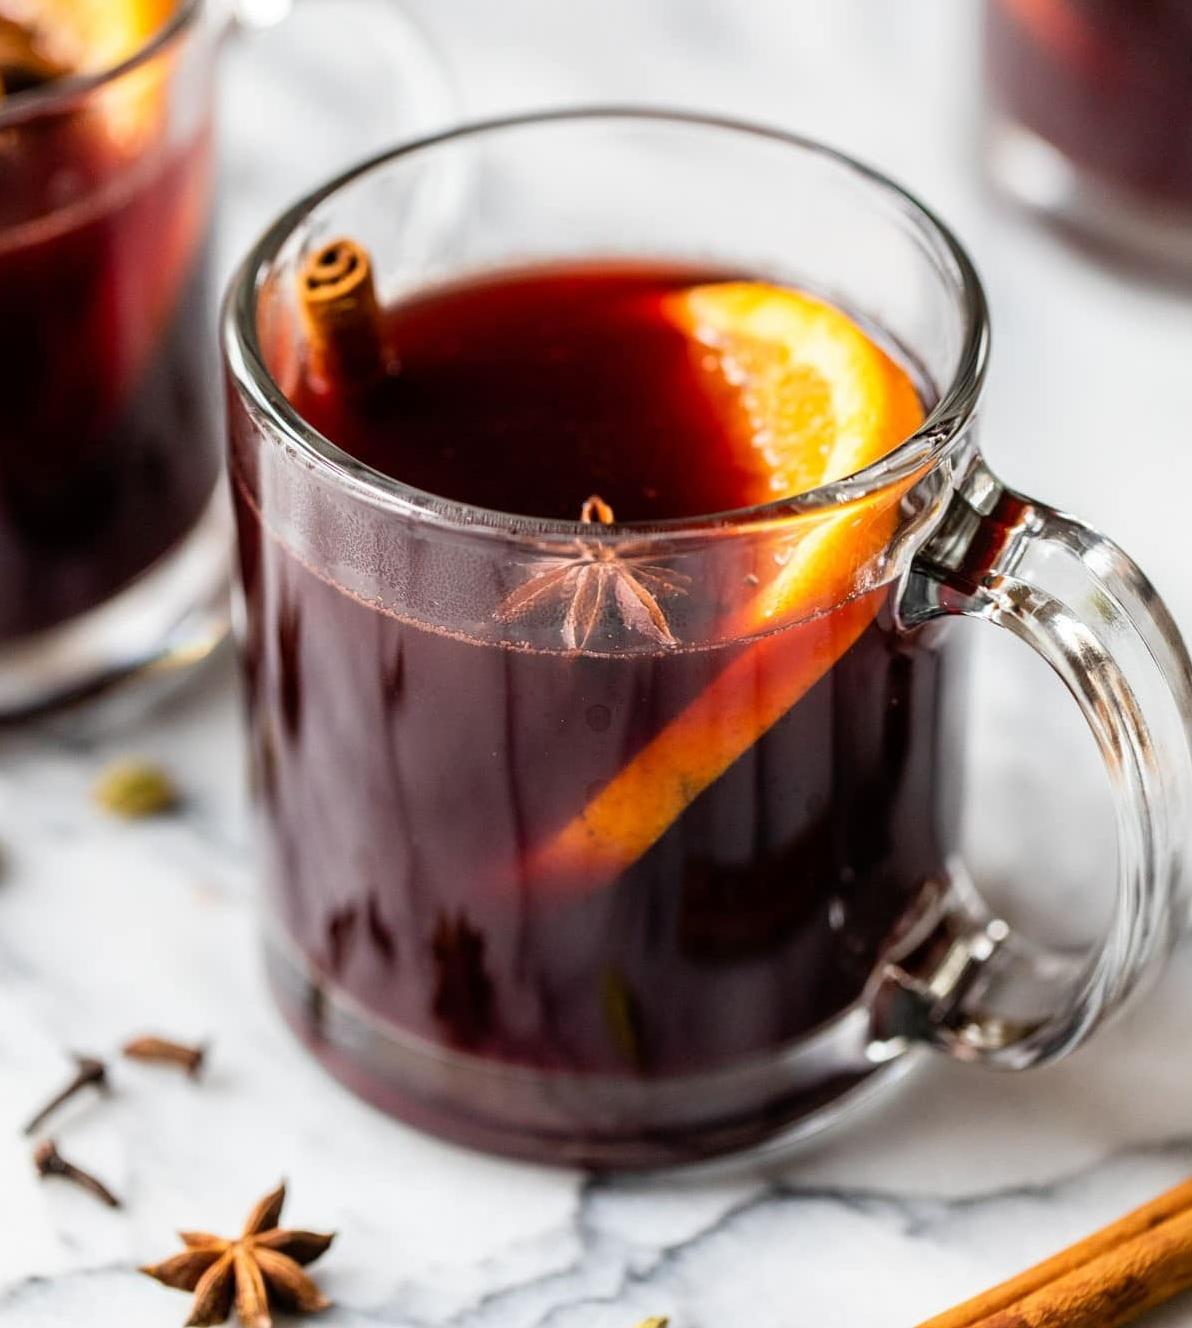  Sit by the fire and enjoy a glass of spiced wine that will warm your heart and soul.